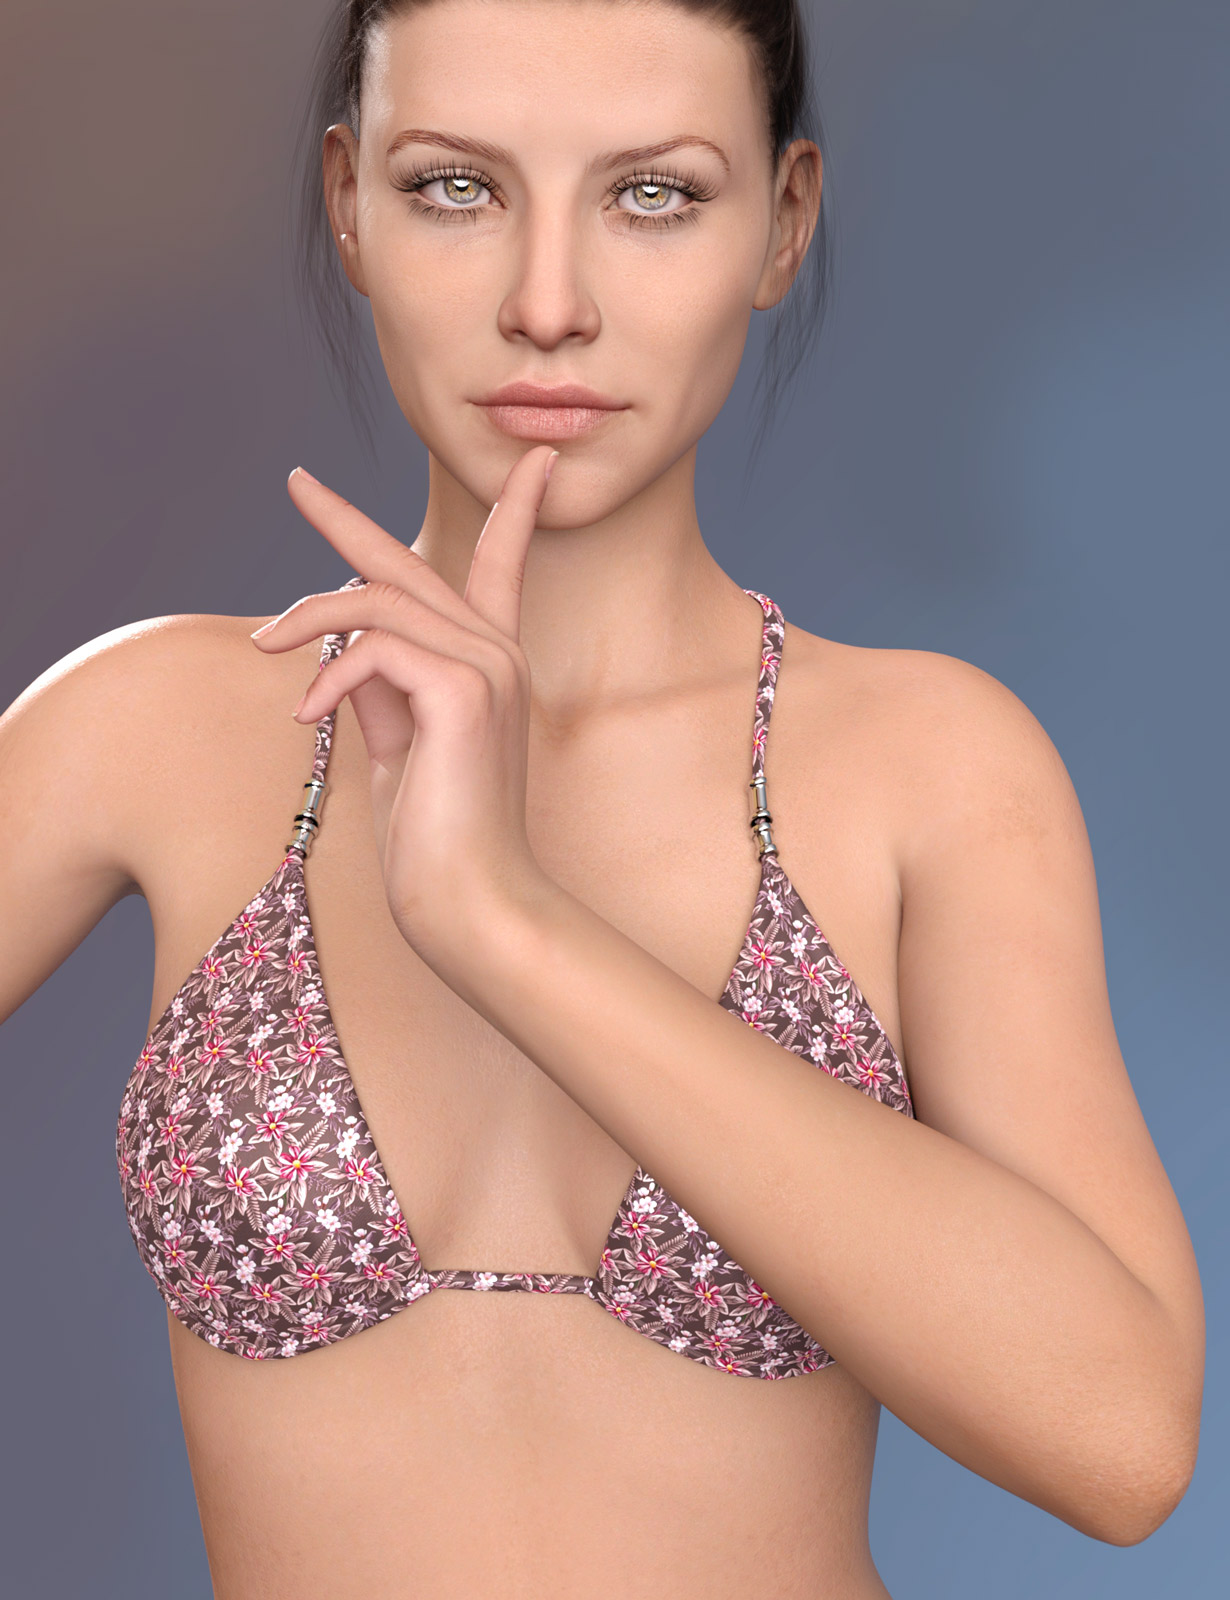 EA Merchant Resource Soft Skin for Genesis 8 and 8.1 Females by: Eichhorn Art, 3D Models by Daz 3D